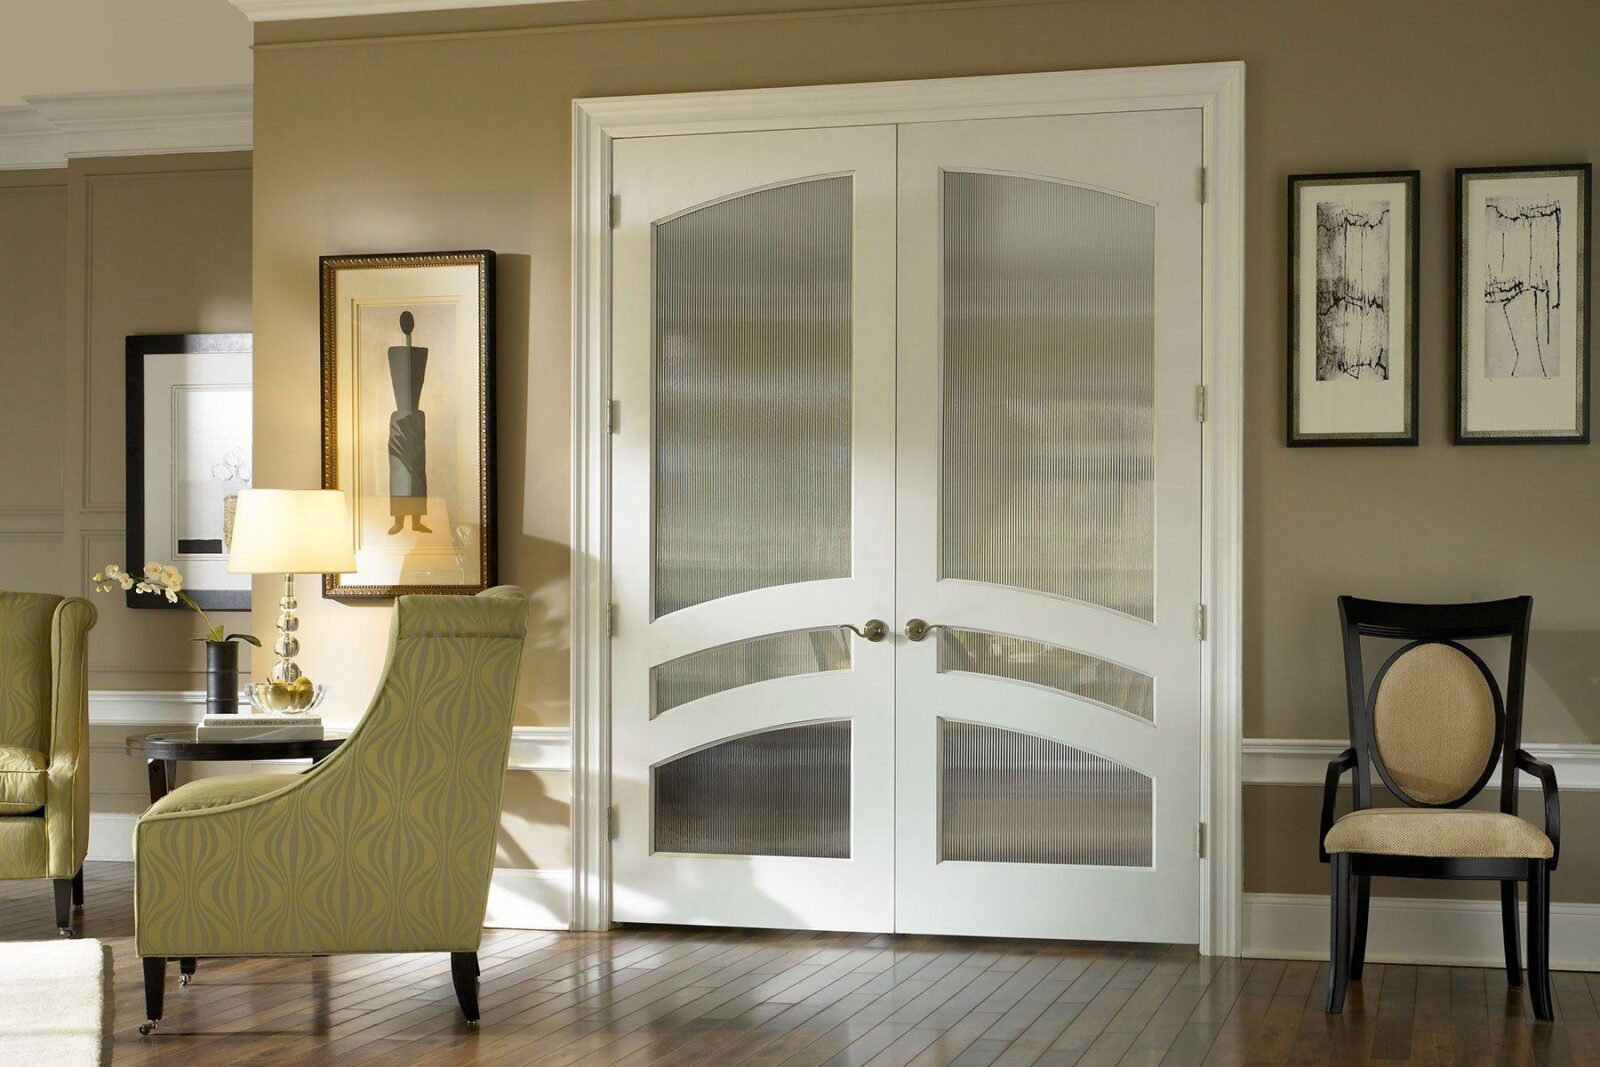 TruStile® TS Series Interior Doors available at Westside Door, a TruStile® Authorized Dealer, for Southern California homeowners. Westside Door serves West Los Angeles and the Southern California area. Also serving Orange County, South Bay, Beverly Hills, Malibu, West Los Angeles and all of Southern California. Call us: (310) 478-0311